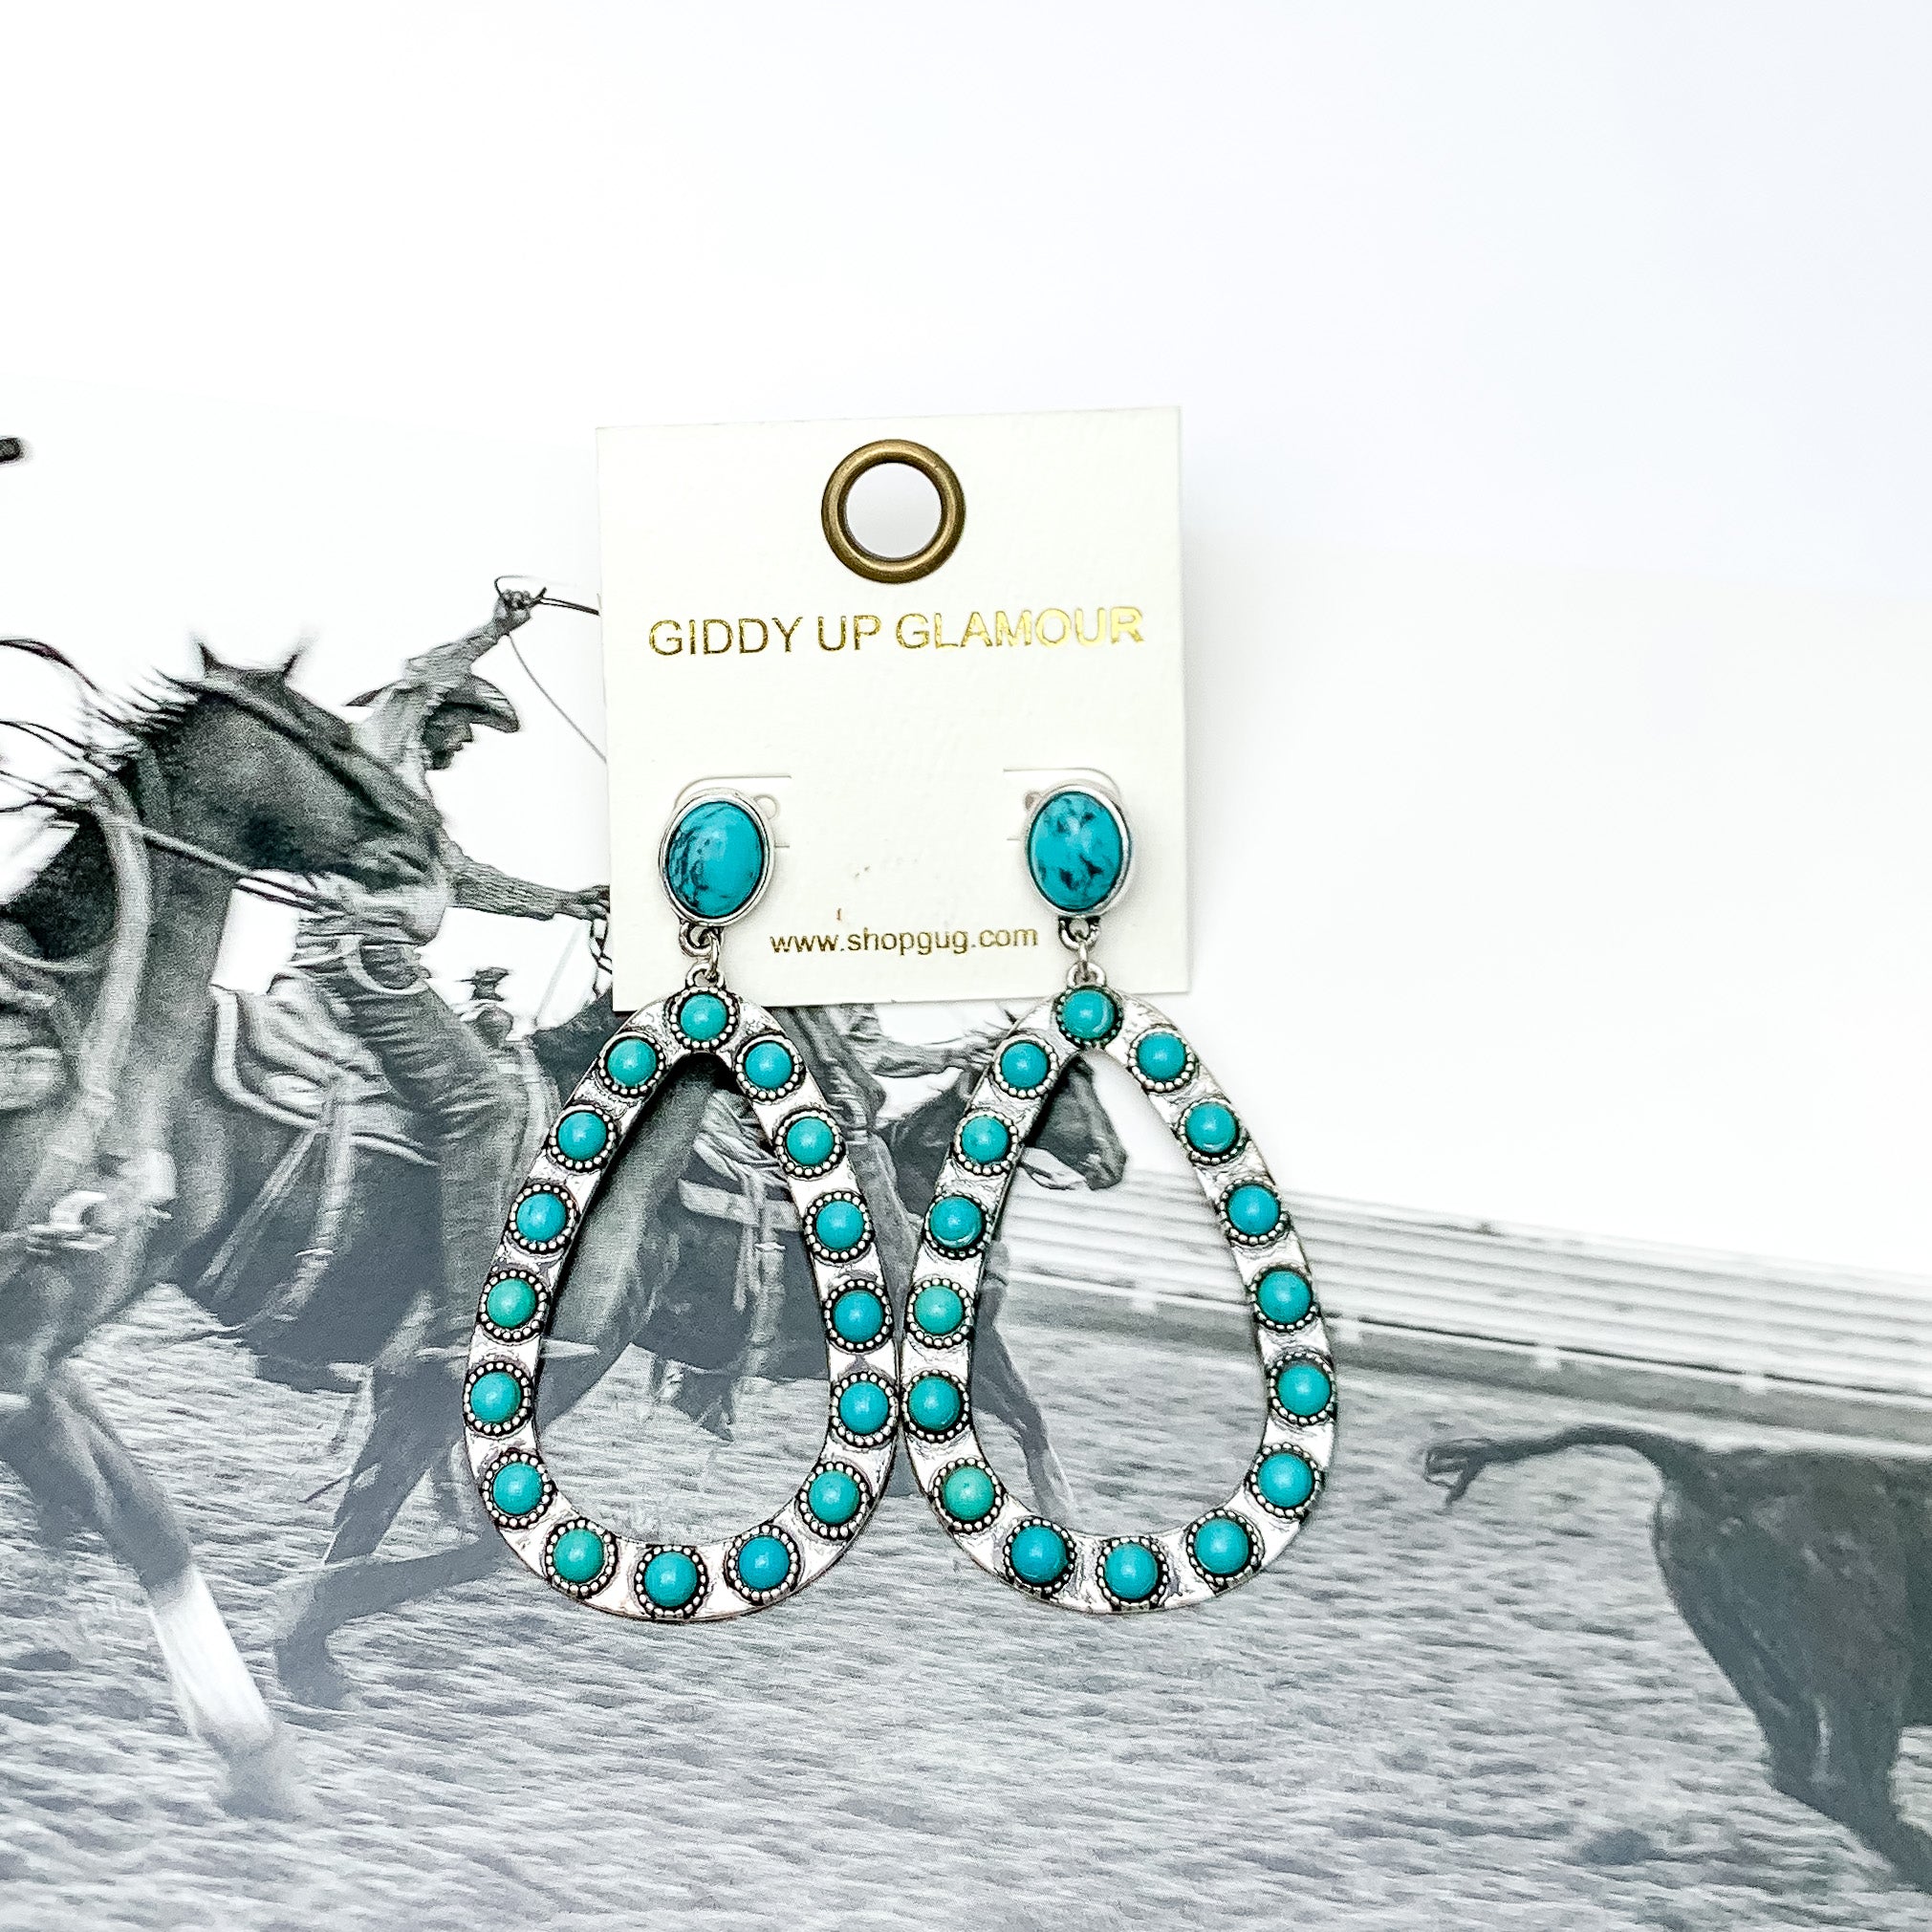 Western Open Teardrop Earrings With Stones in Turquoise. Pictured on a western background picture.